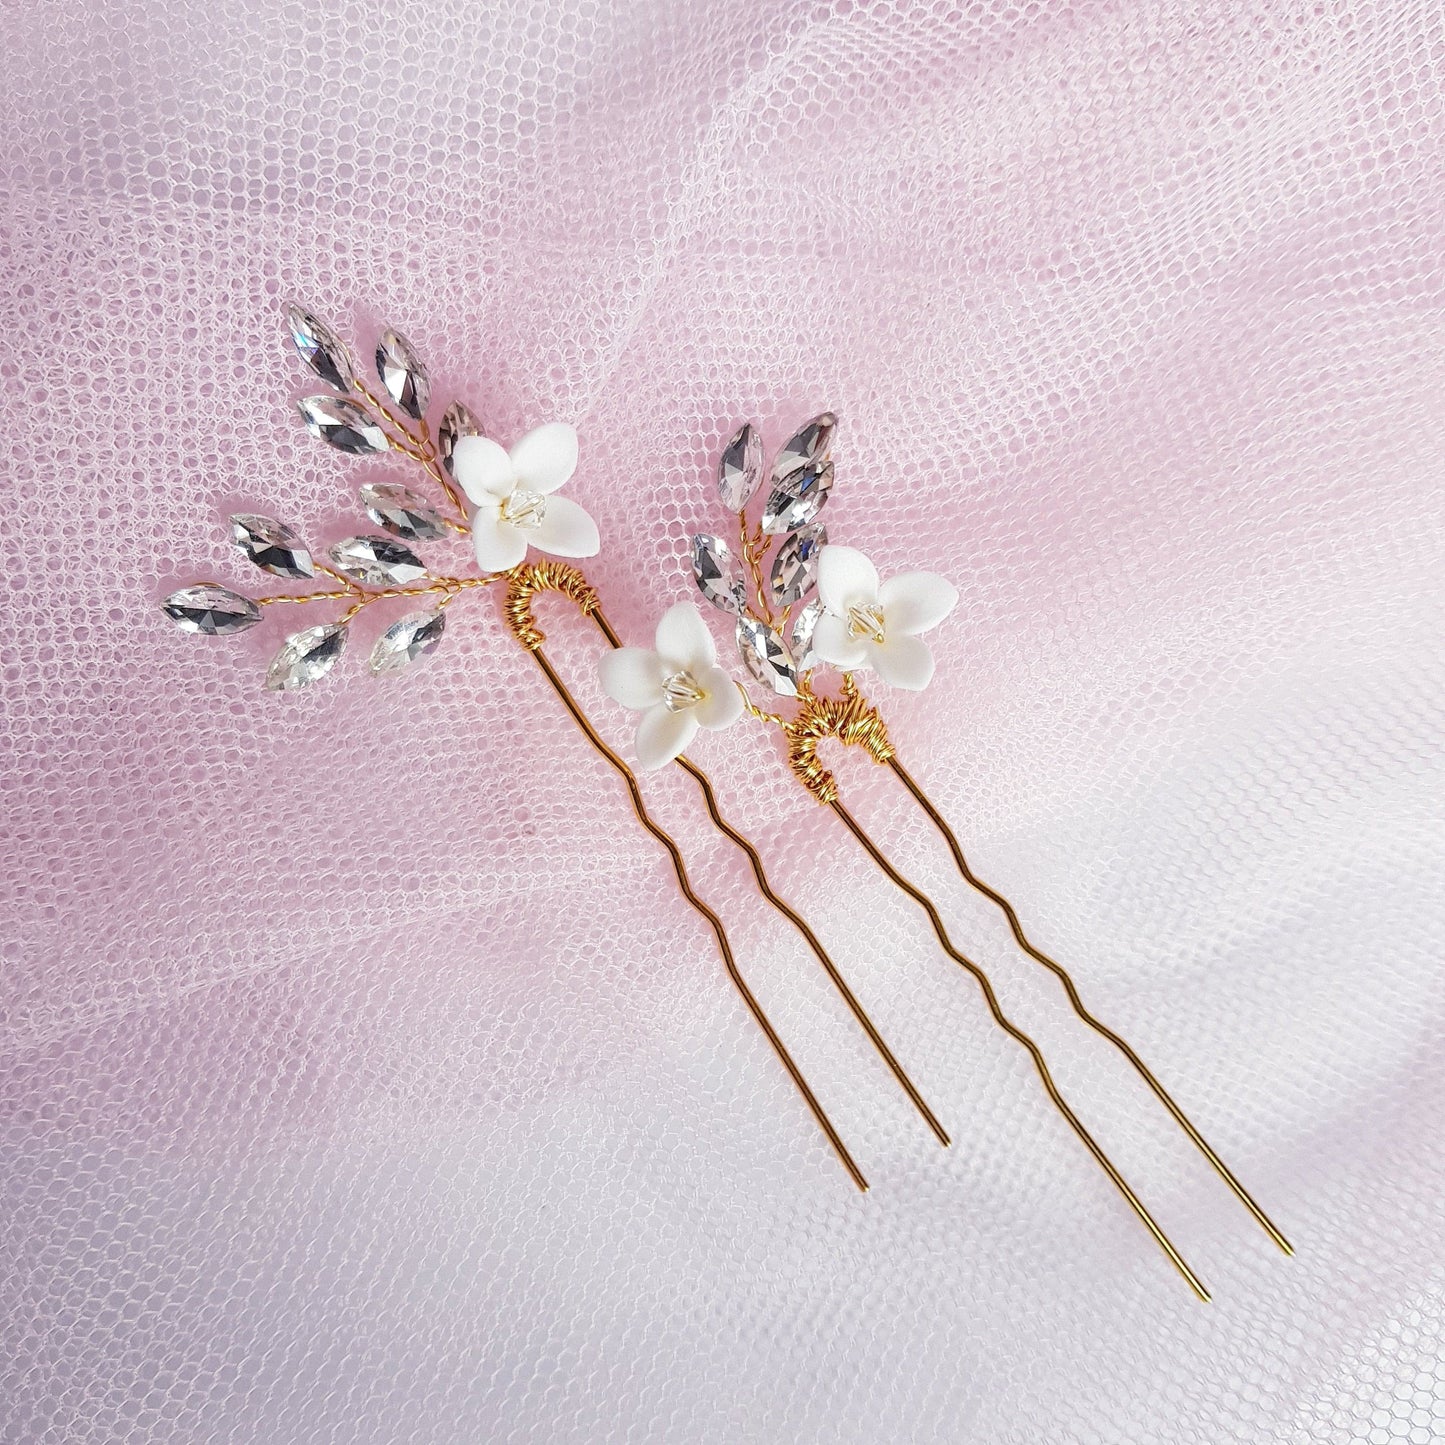 BOUTIQUEBYBRENDALEE FEUILLES BLING Hair U Pins set of 2 Small White Flowers Hairpins crystal beads Bridal Wedding Hair Pin Accessories